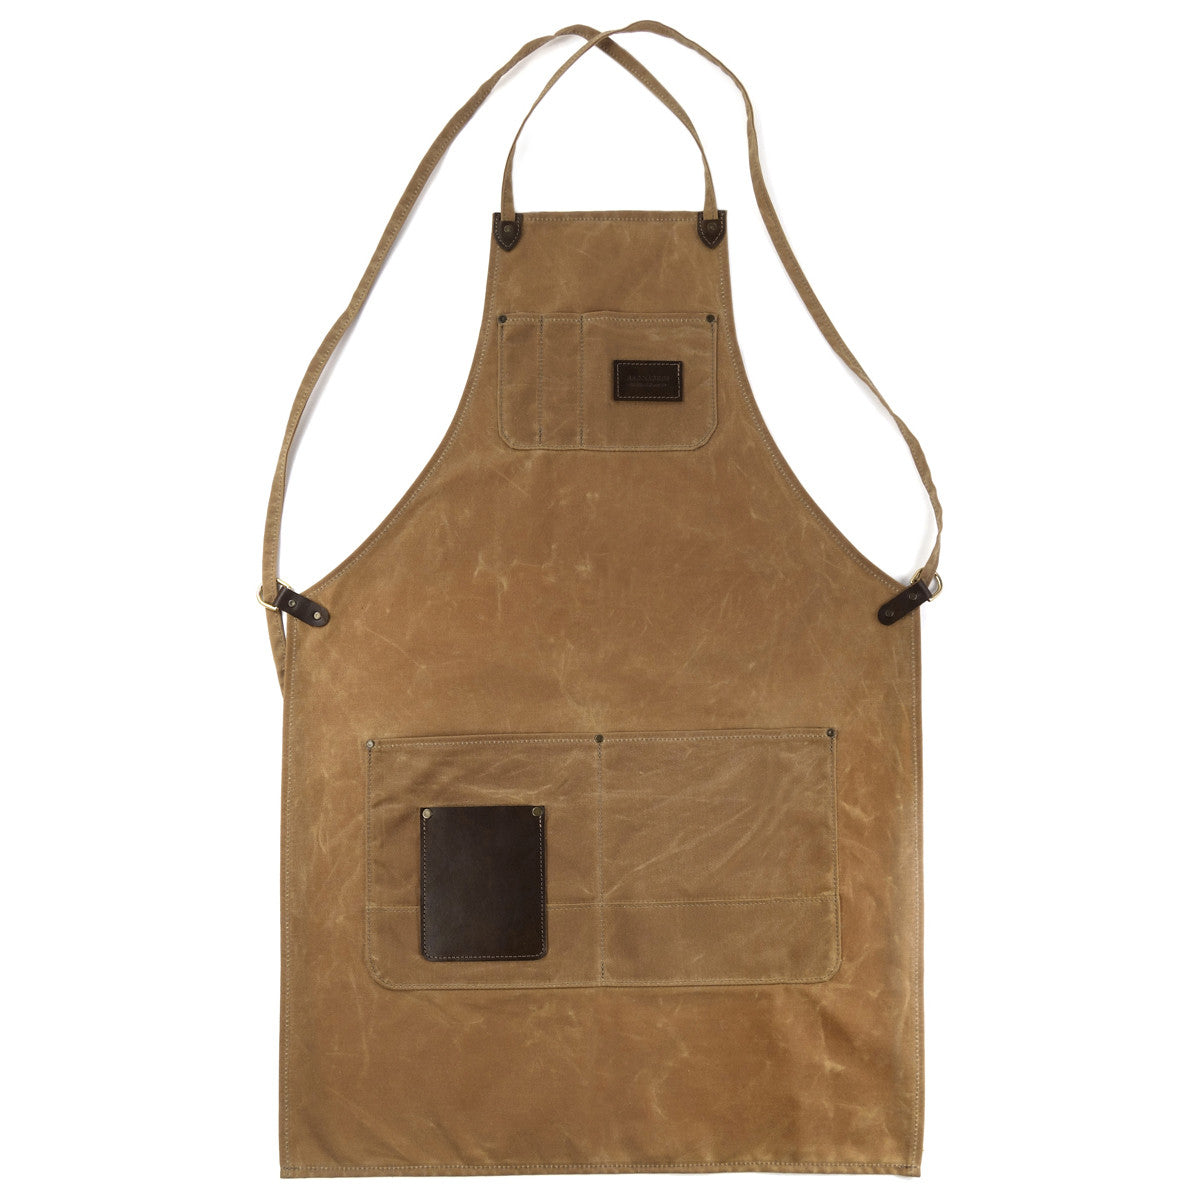 Winston apron, waxed canvas apron, red clouds apron, woodworking apron, metalworking apron, hand eye supply, shop gear, workwear, made in usa, made in portland, Drawing inspiration from classic shop aprons used by wood and metal workers for centuries, the Winston Apron combines a classic look and feel with modern feature and construction updates that enhance the product’s longevity.